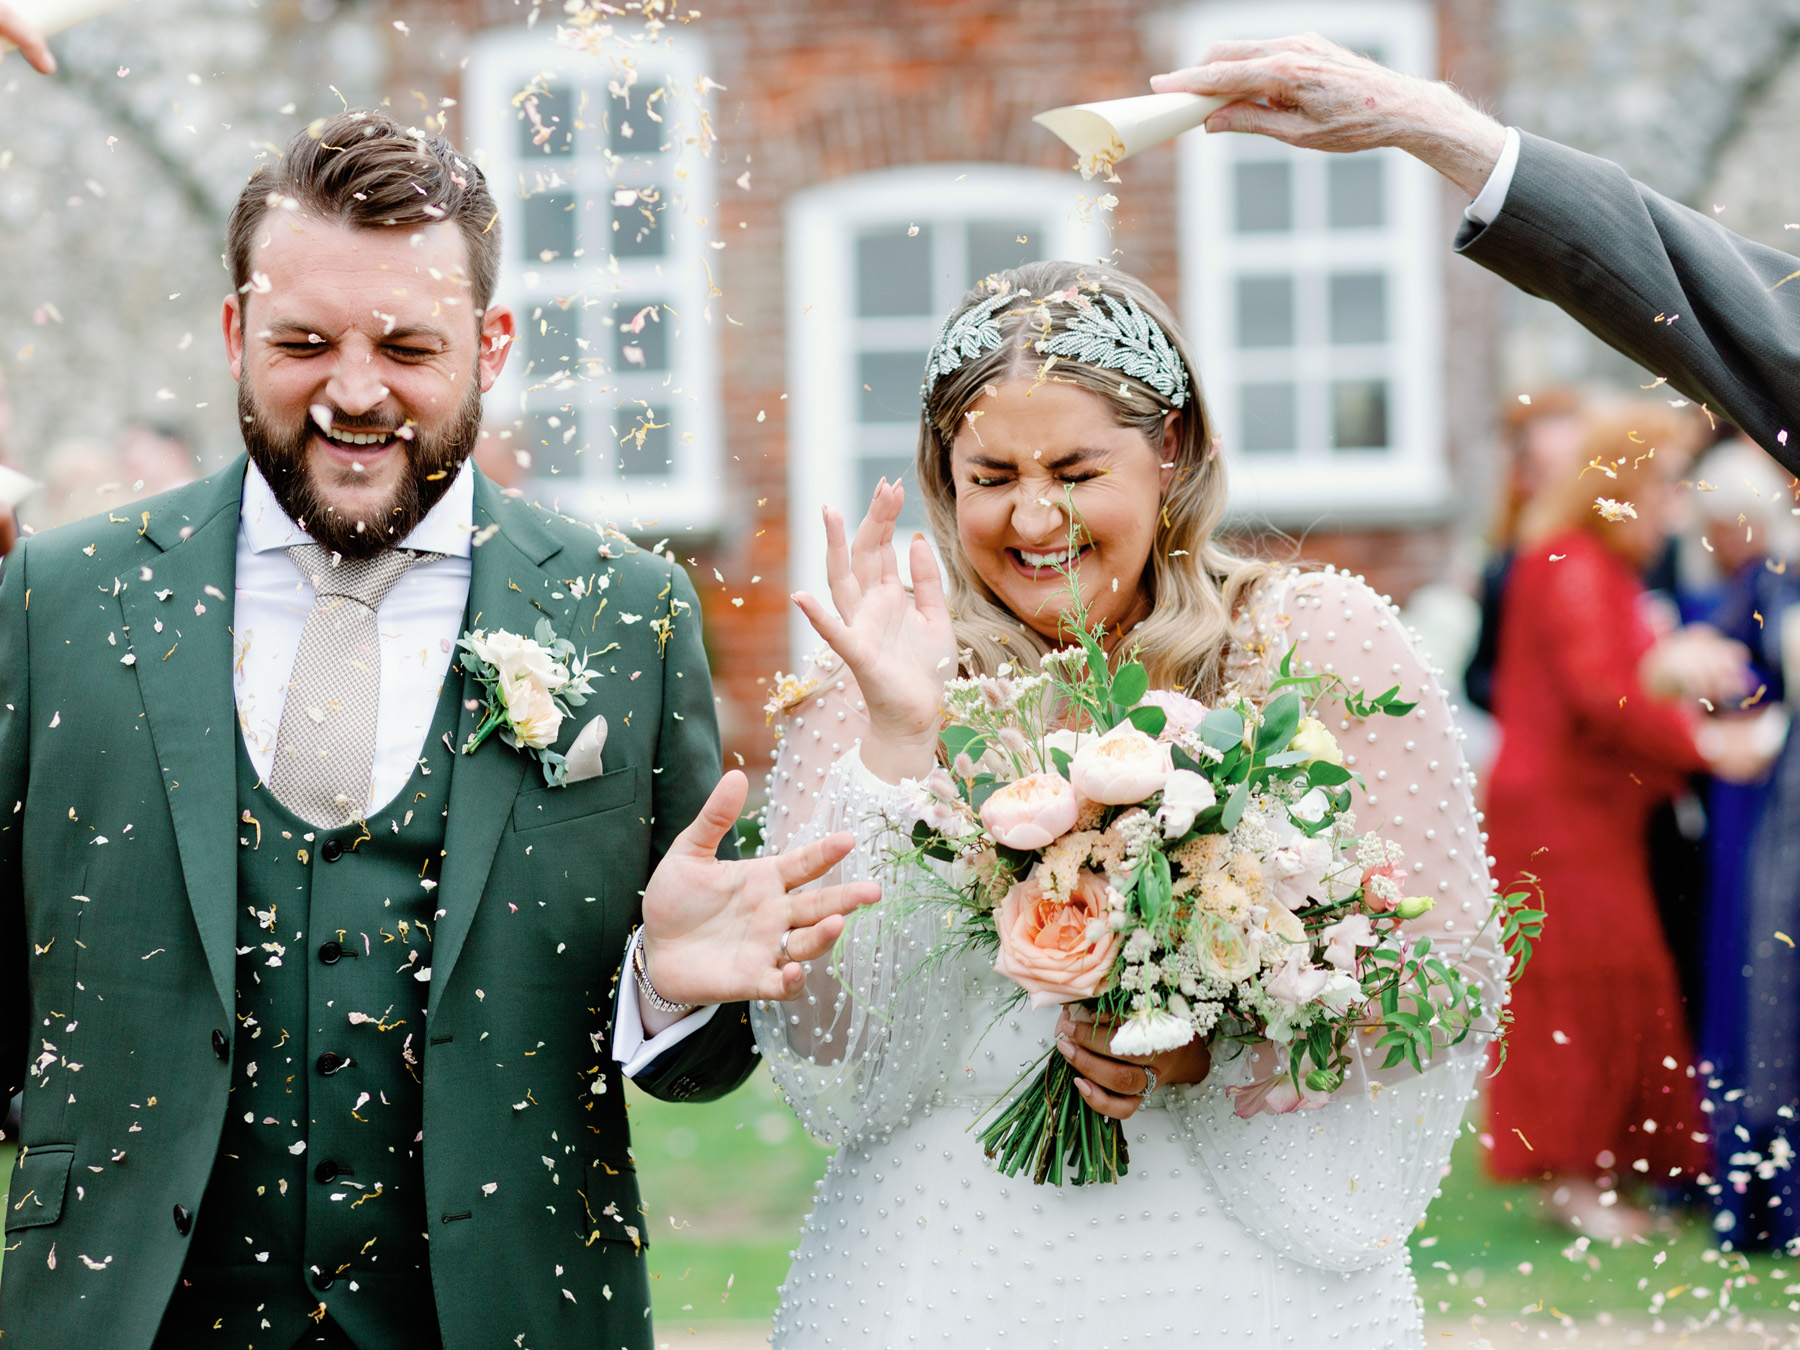 Bride and groom in a confetti shower. Bride holds a peach bouquet and wears a dress covered with pearls.